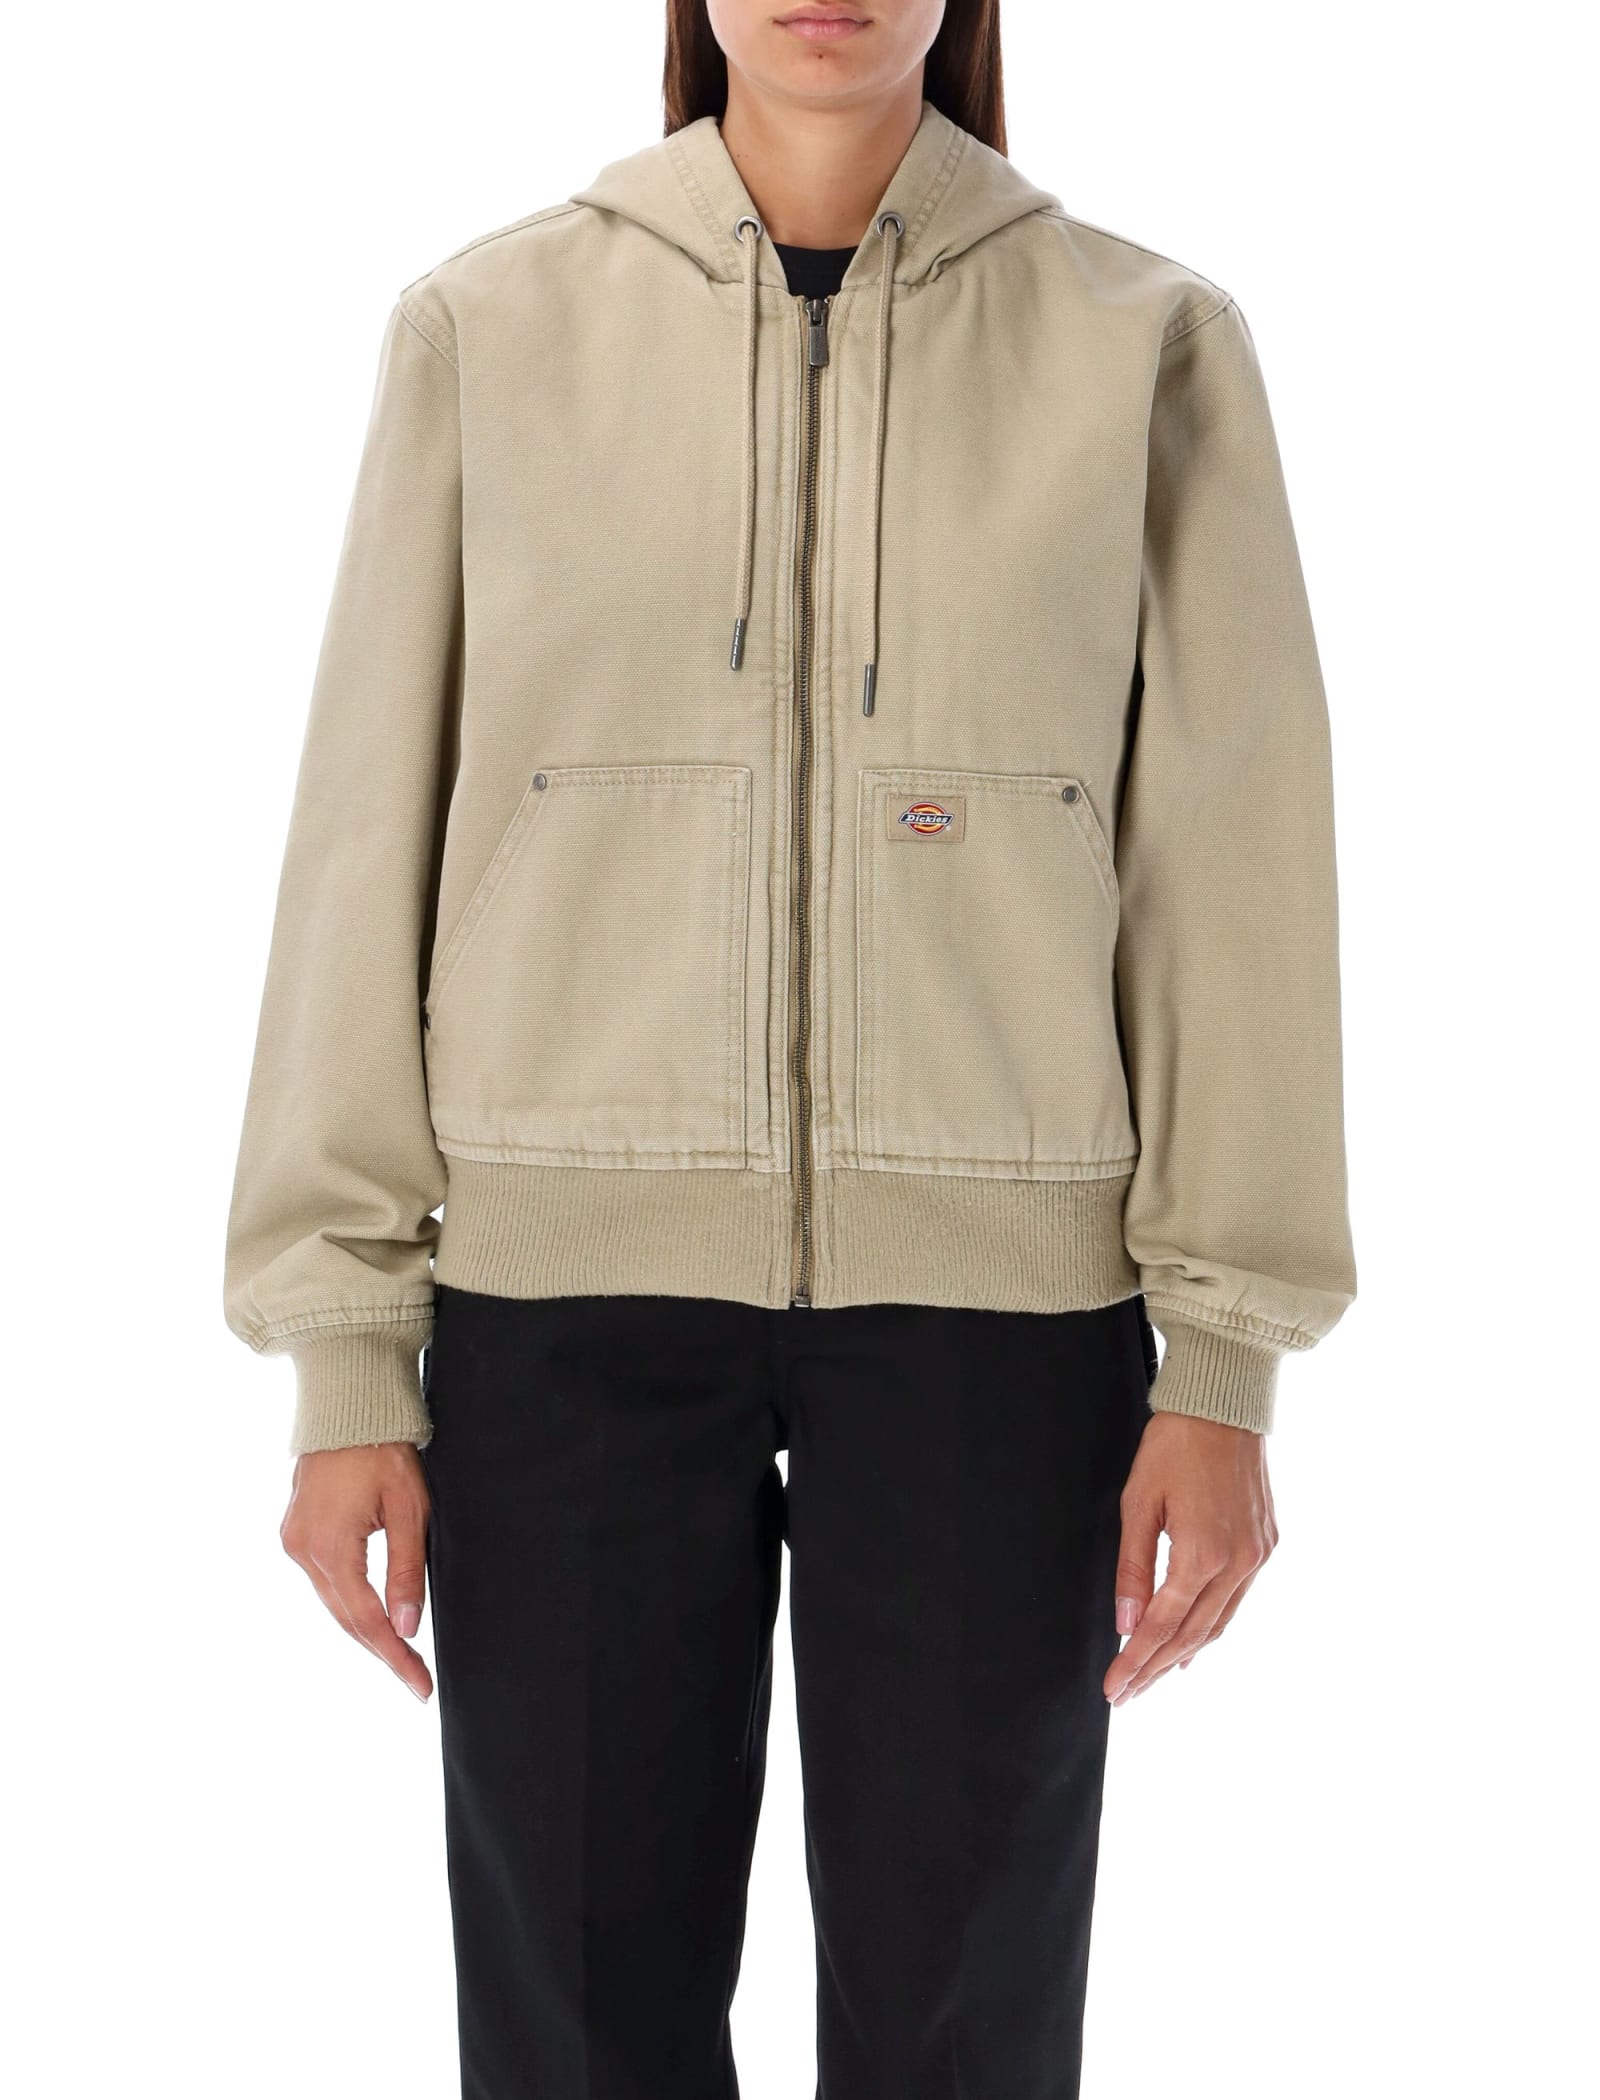 Dickies Sherpa Lined Jacket - 0DESERT SAND - female - Size: Large